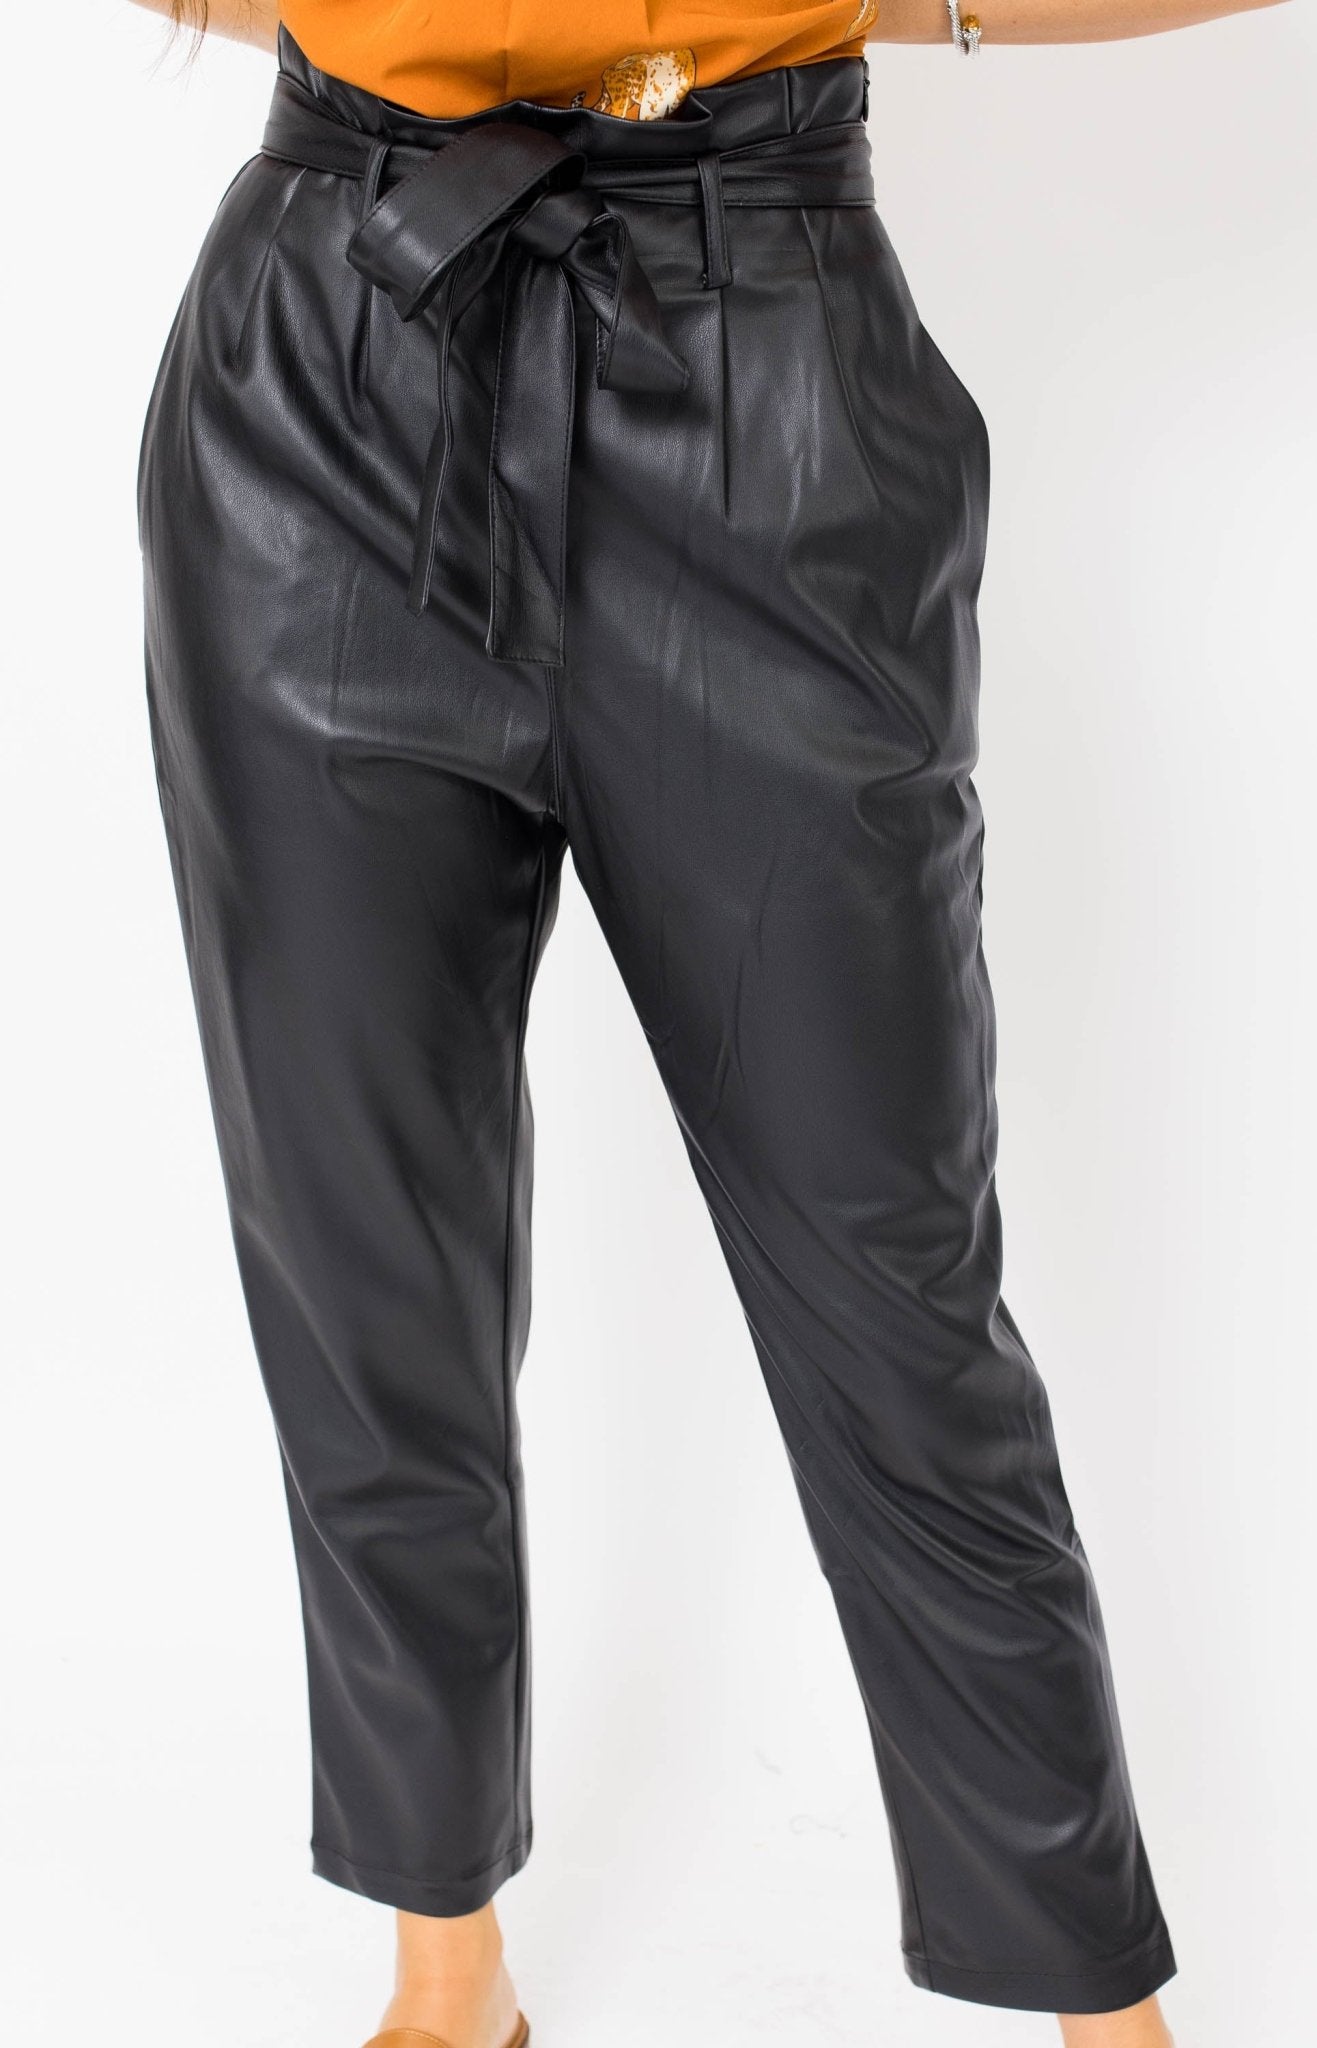 Dolce Cabo: Everything and More Vegan Leather Trousers, BLACK Pants - 32P